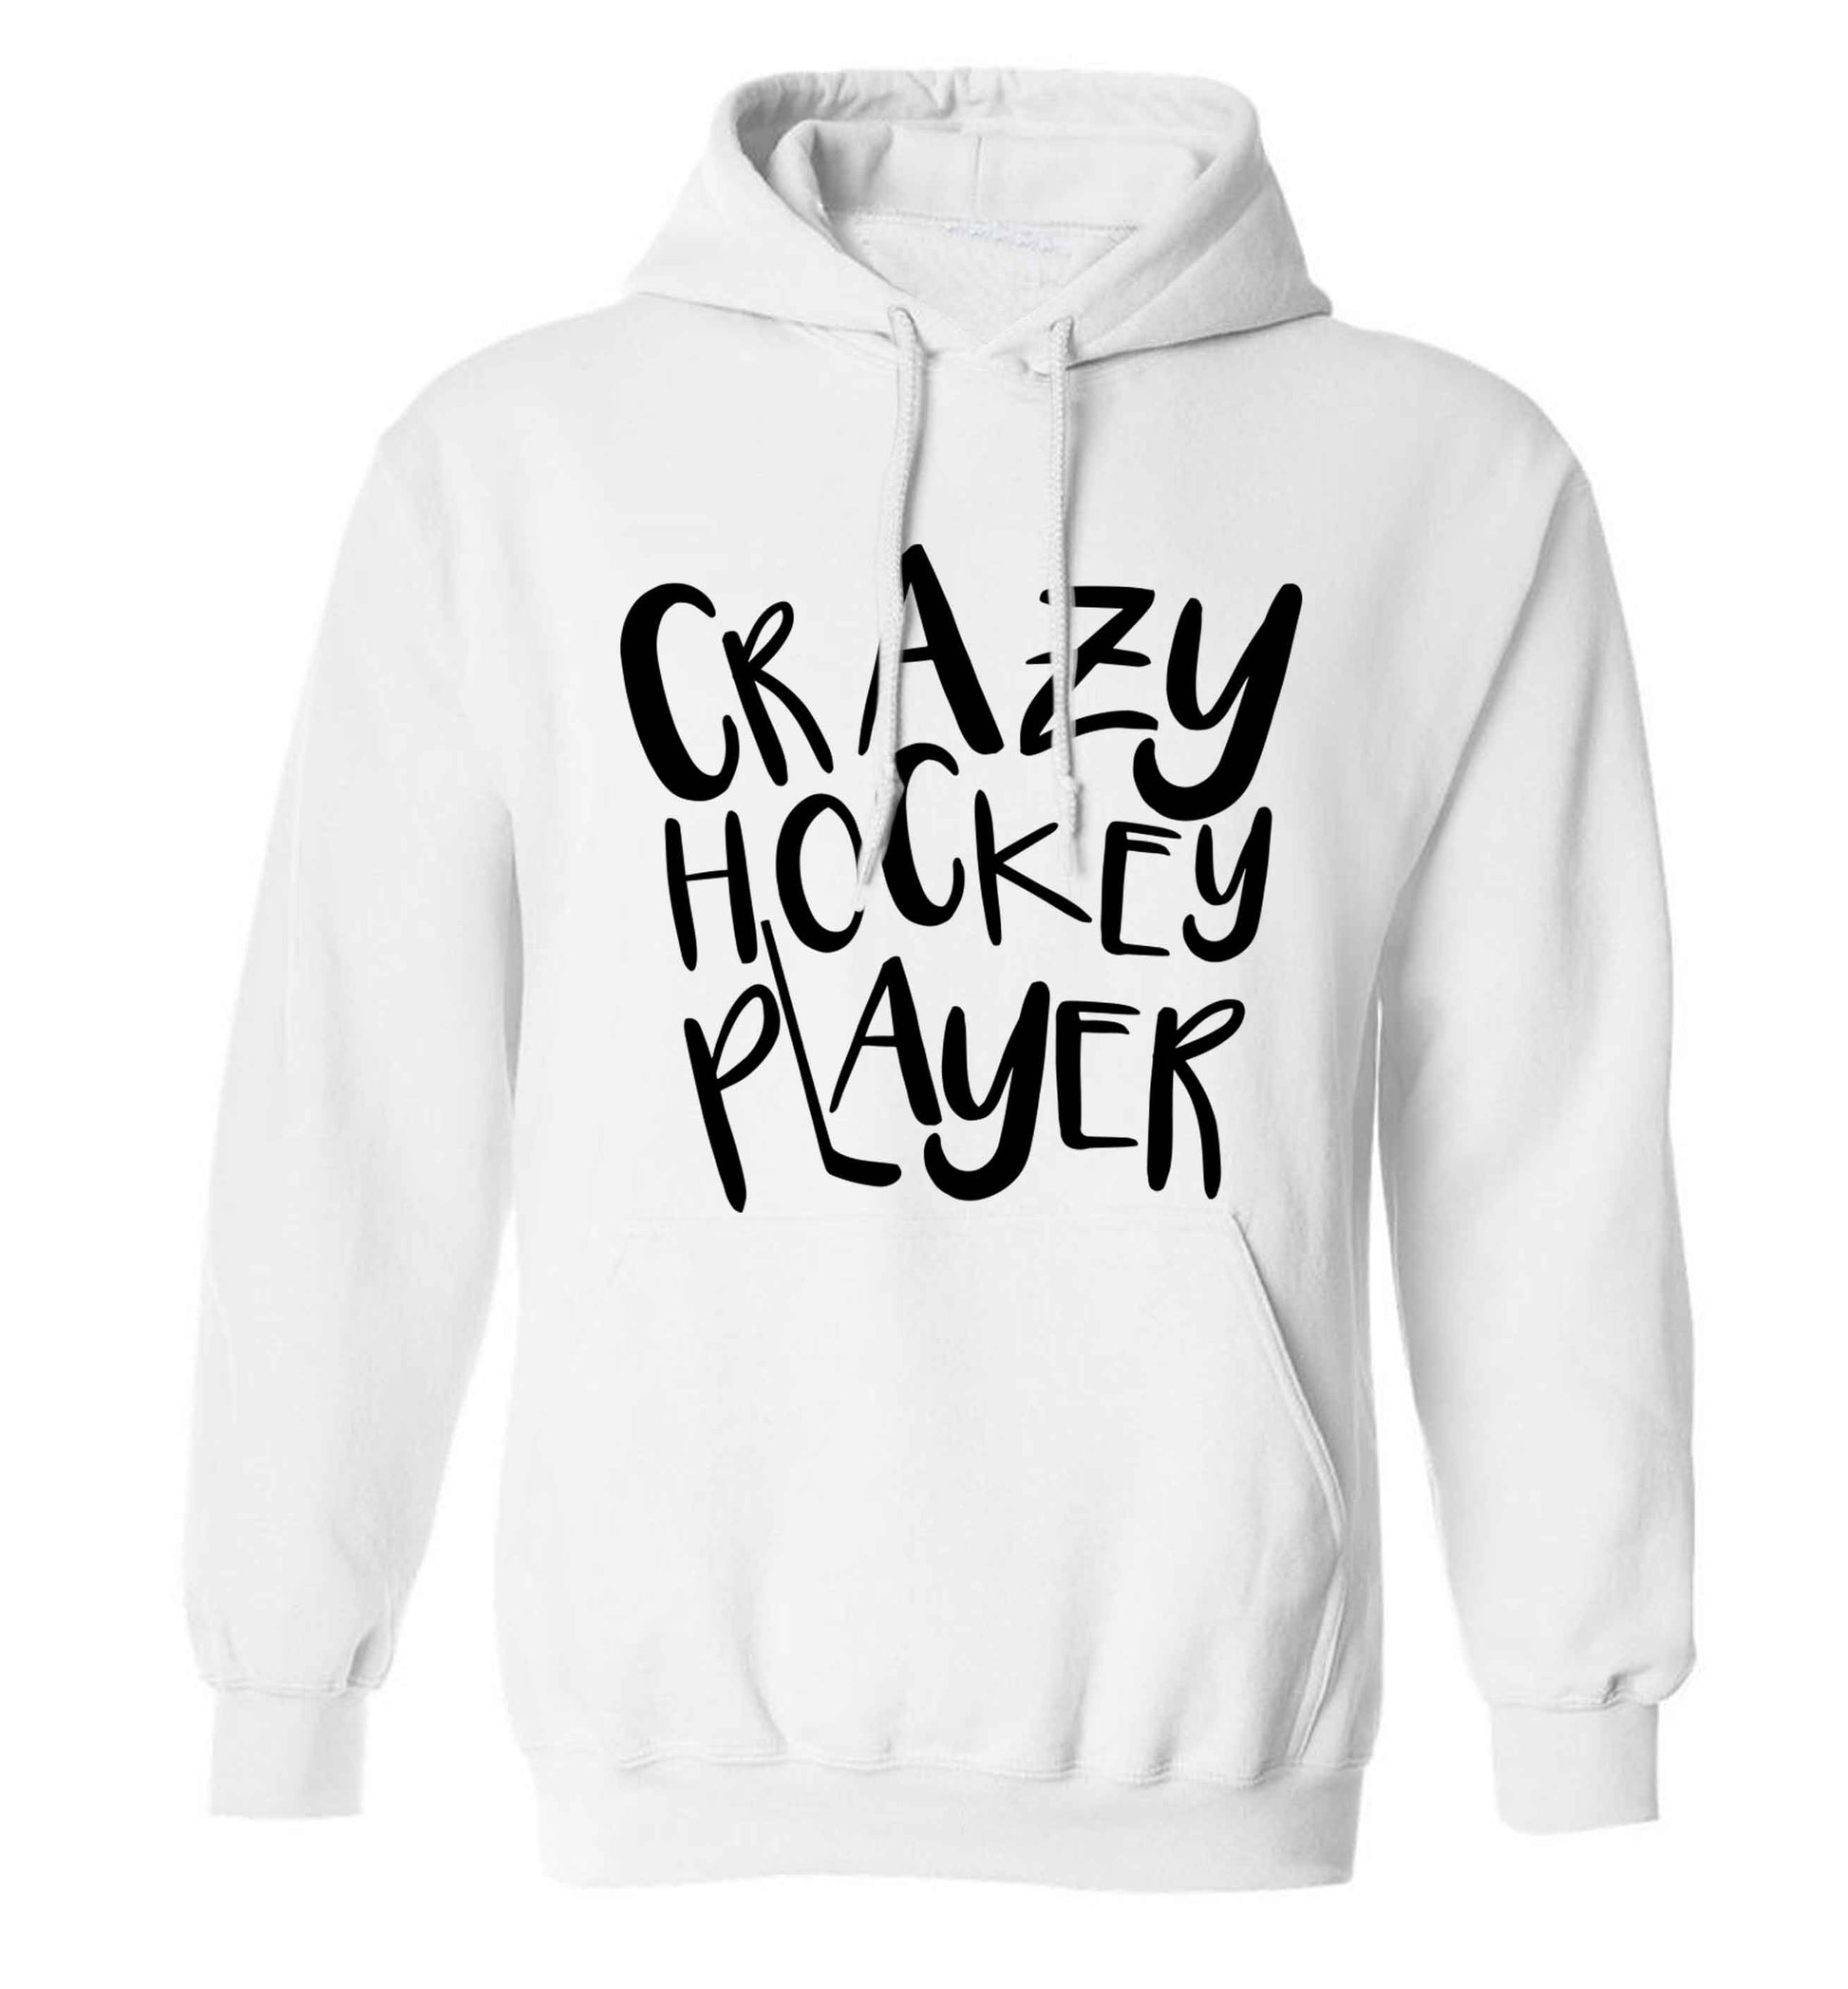 Crazy hockey player adults unisex white hoodie 2XL